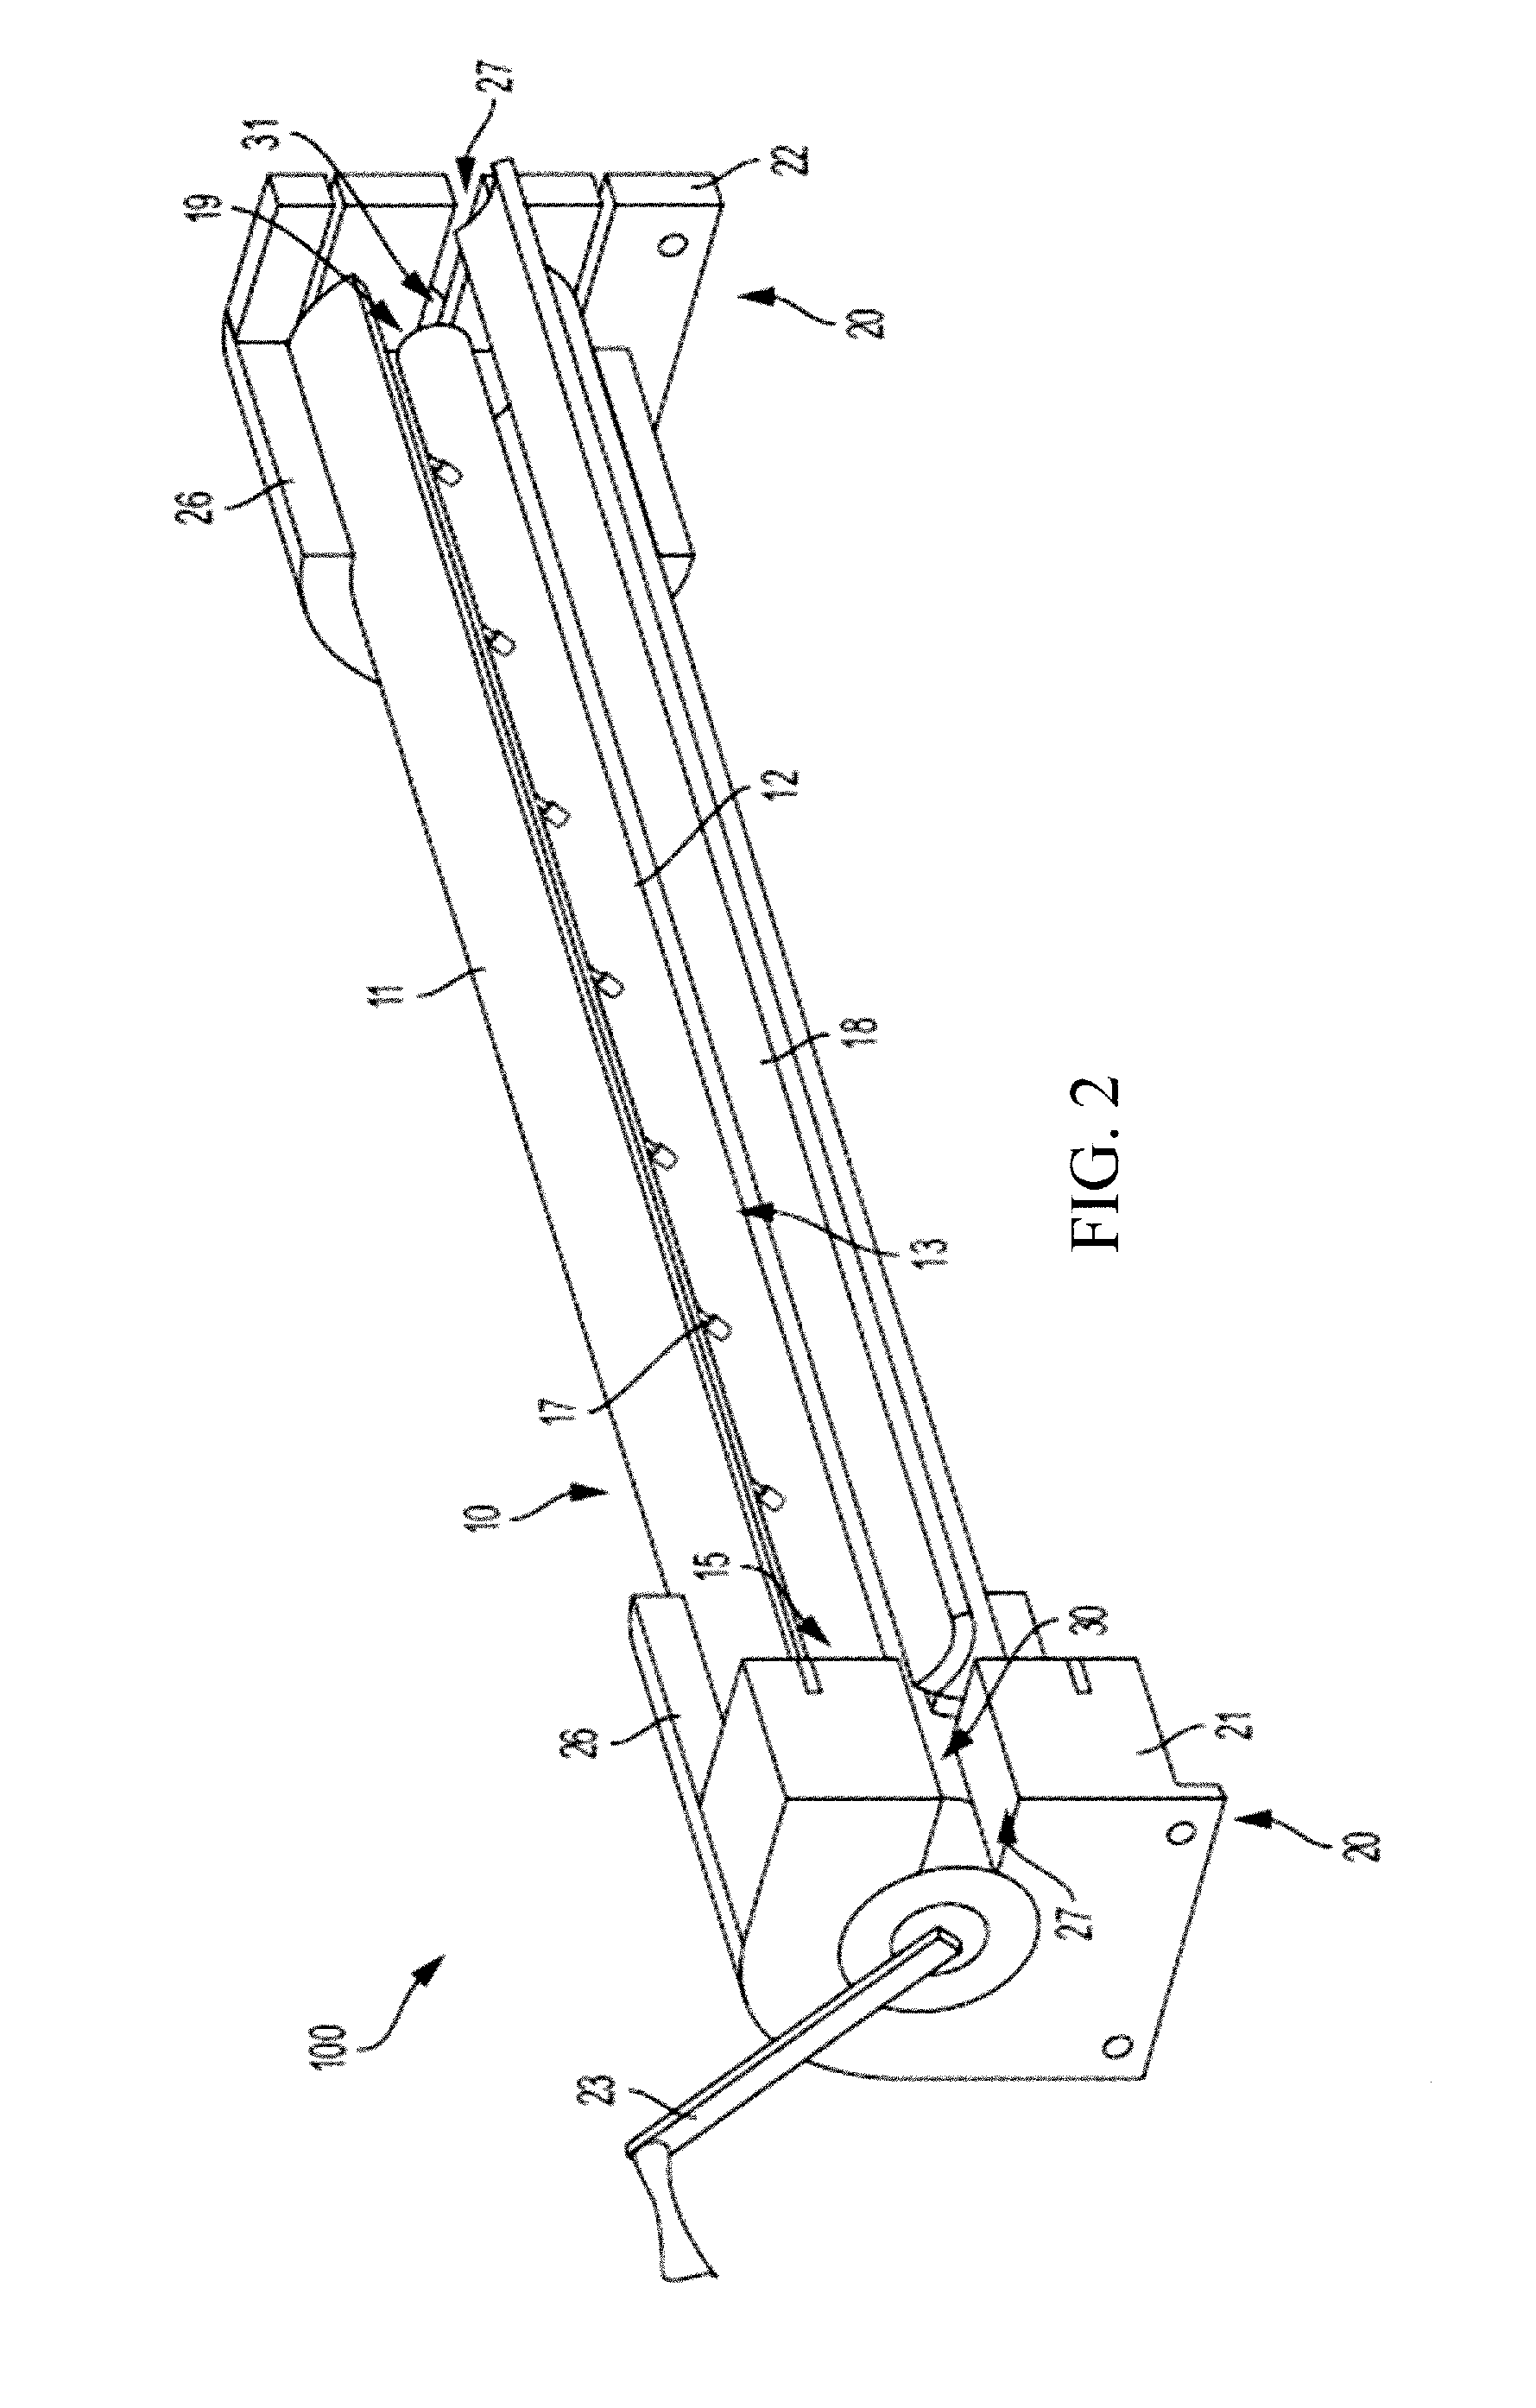 Tabletop Protective Covering Disposal Systems and Related Methods